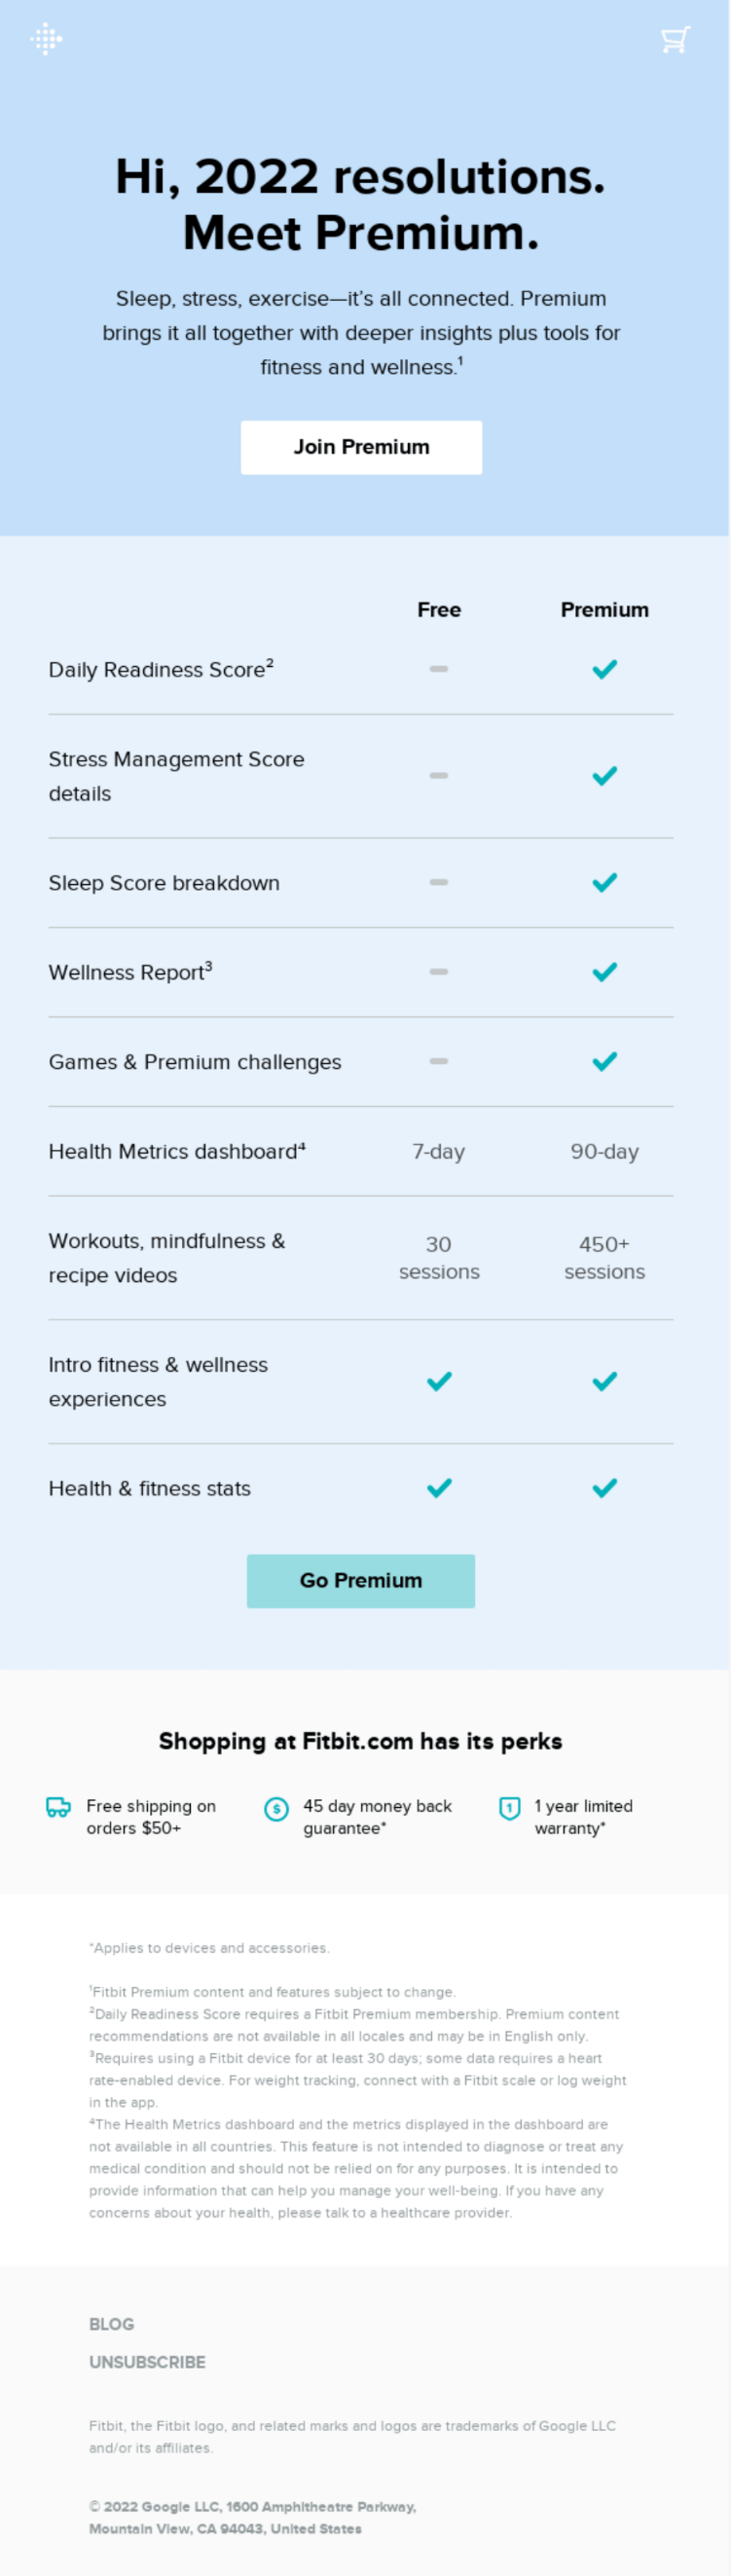 New Year email from Fitbit